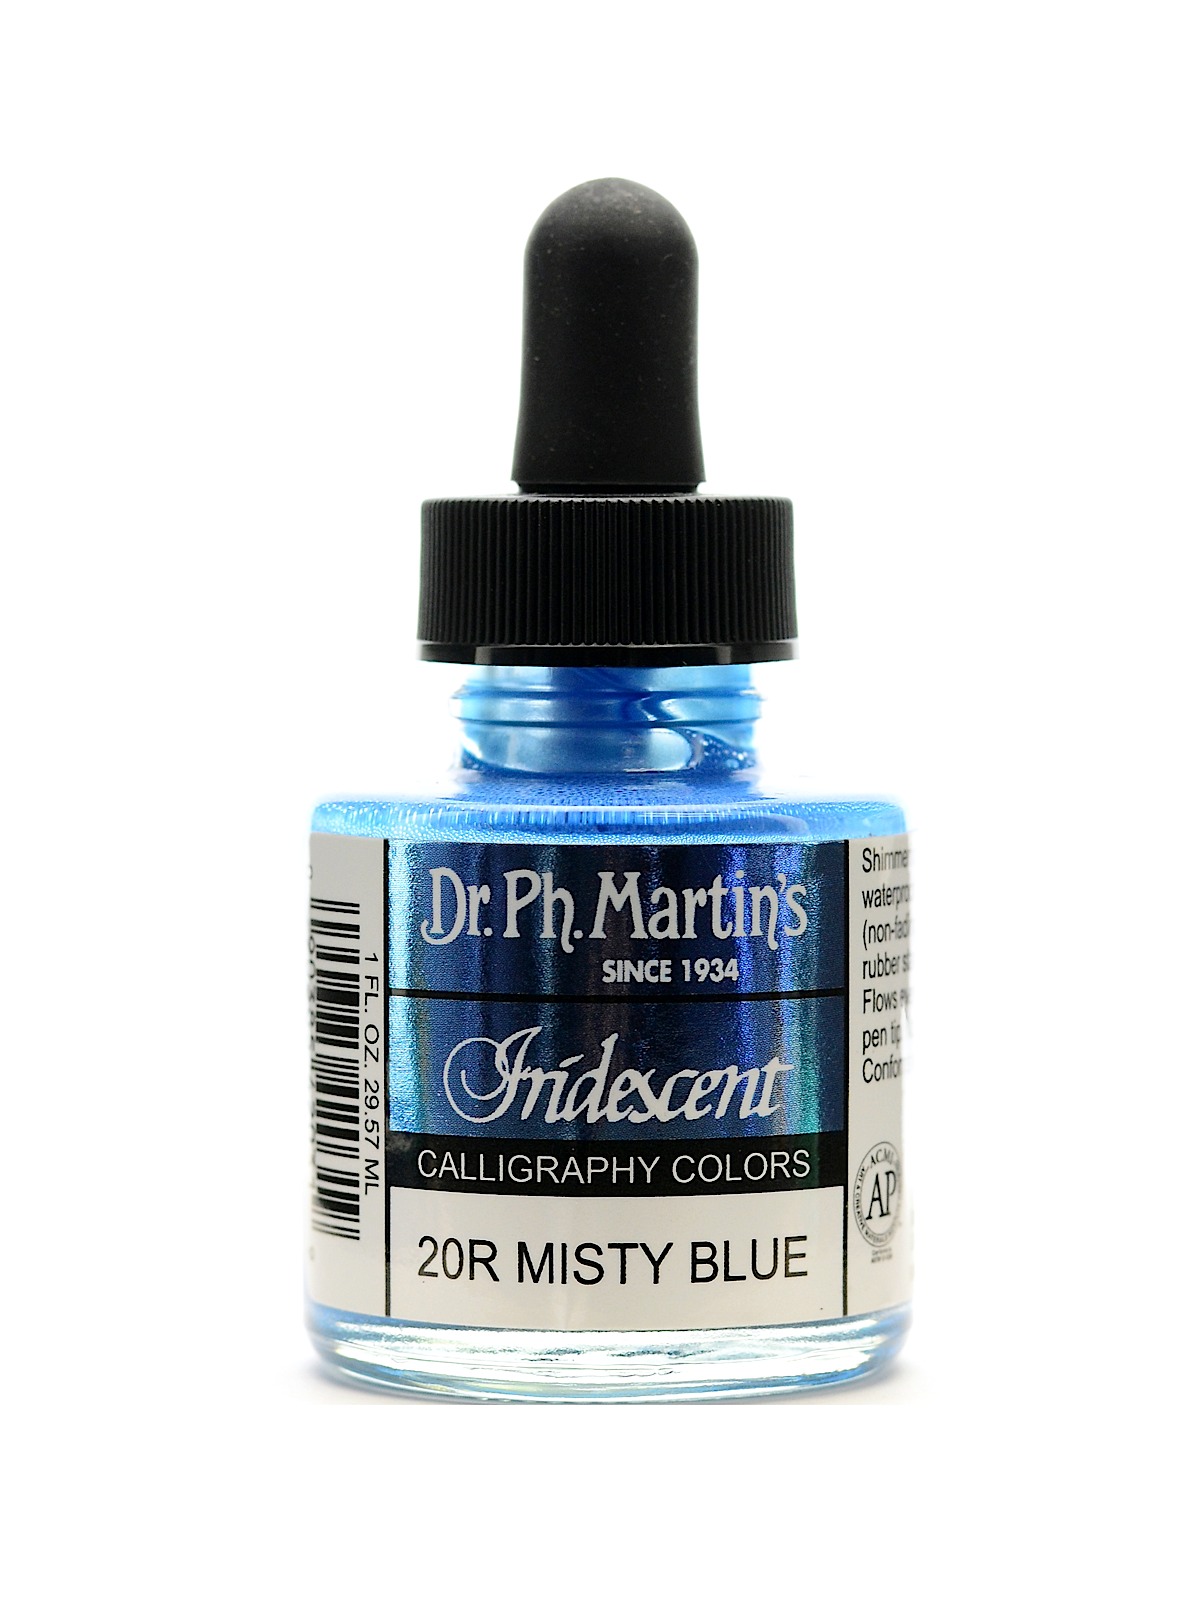 Iridescent Calligraphy Colors 1 Oz. Misty Blue